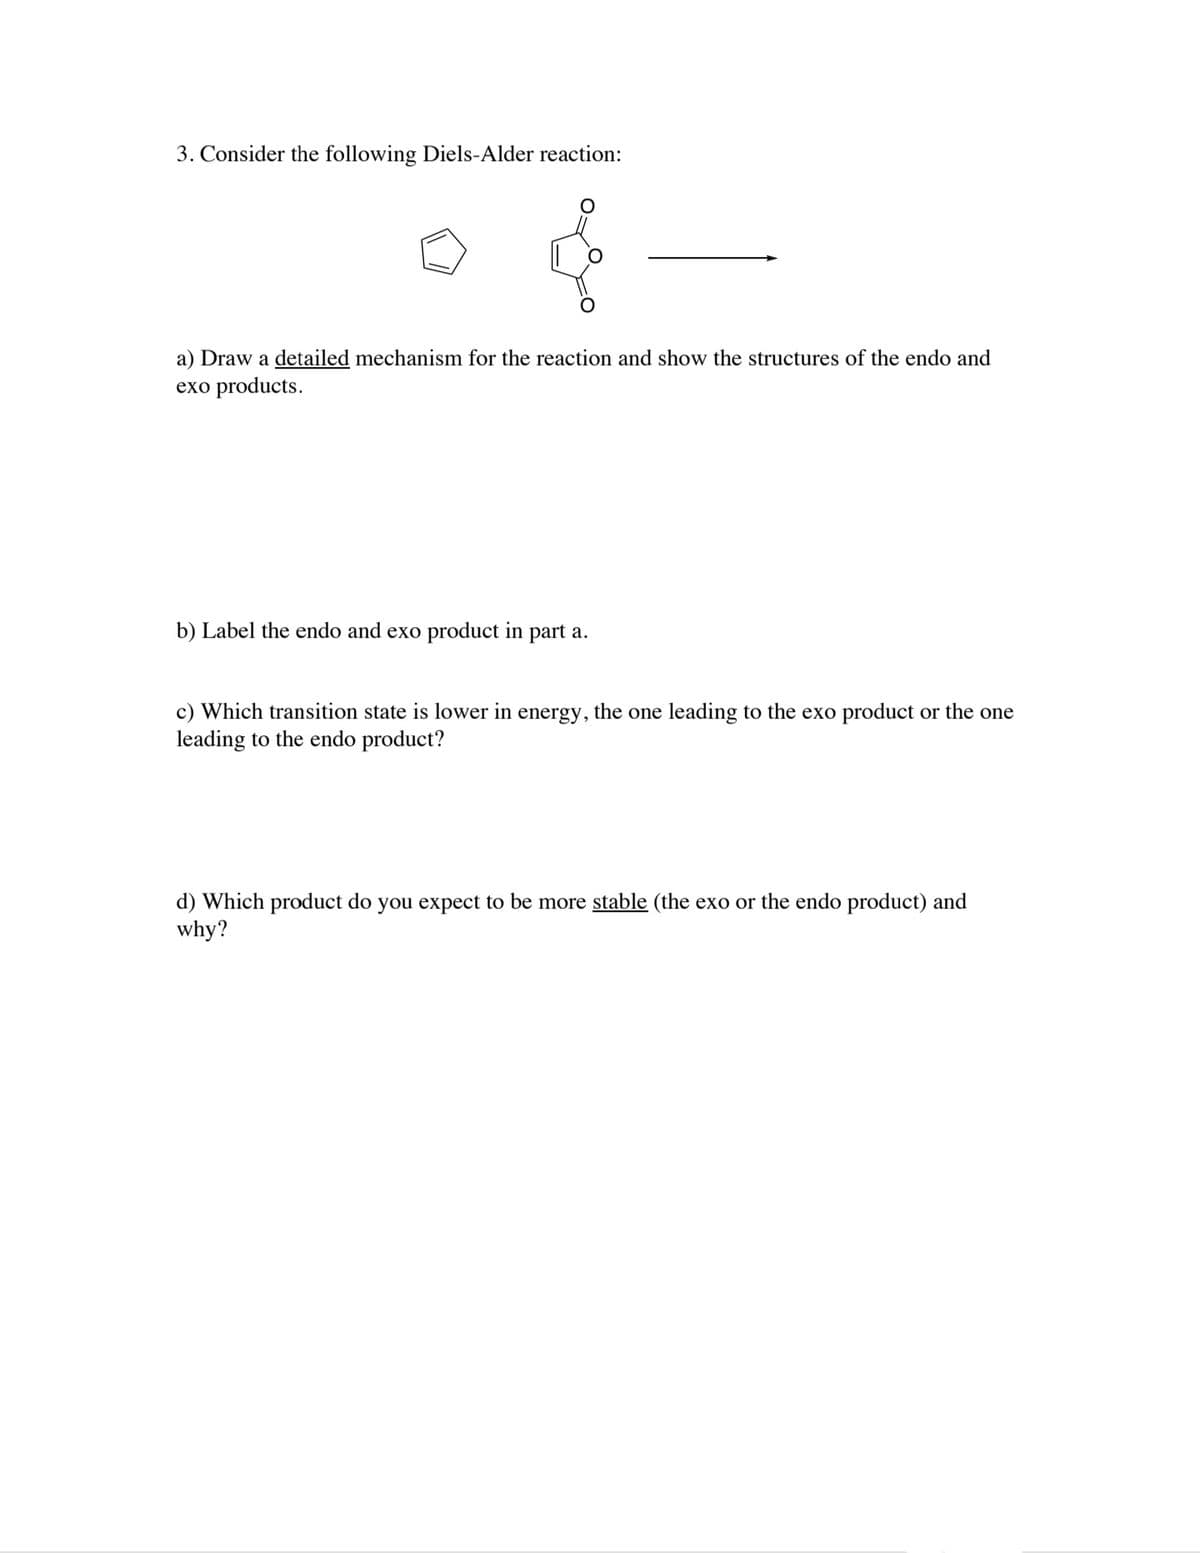 3. Consider the following Diels-Alder reaction:
a) Draw a detailed mechanism for the reaction and show the structures of the endo and
exo products.
b) Label the endo and exo product in part a.
c) Which transition state is lower in energy, the one leading to the exo product or the one
leading to the endo product?
d) Which product do you expect to be more stable (the exo or the endo product) and
why?
